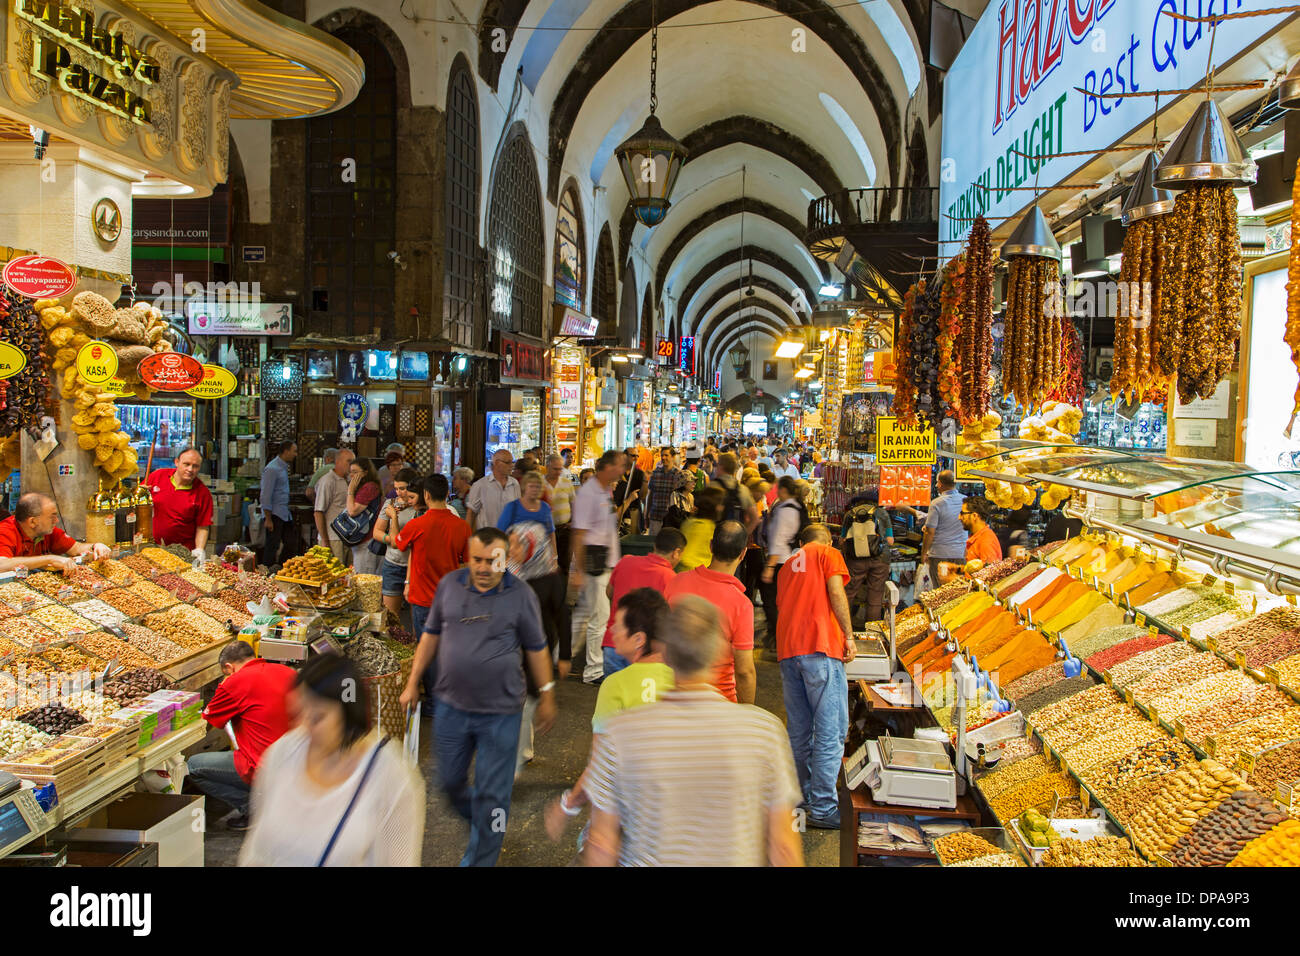 shoppers and shops spice market istanbul turkey stock photo alamy